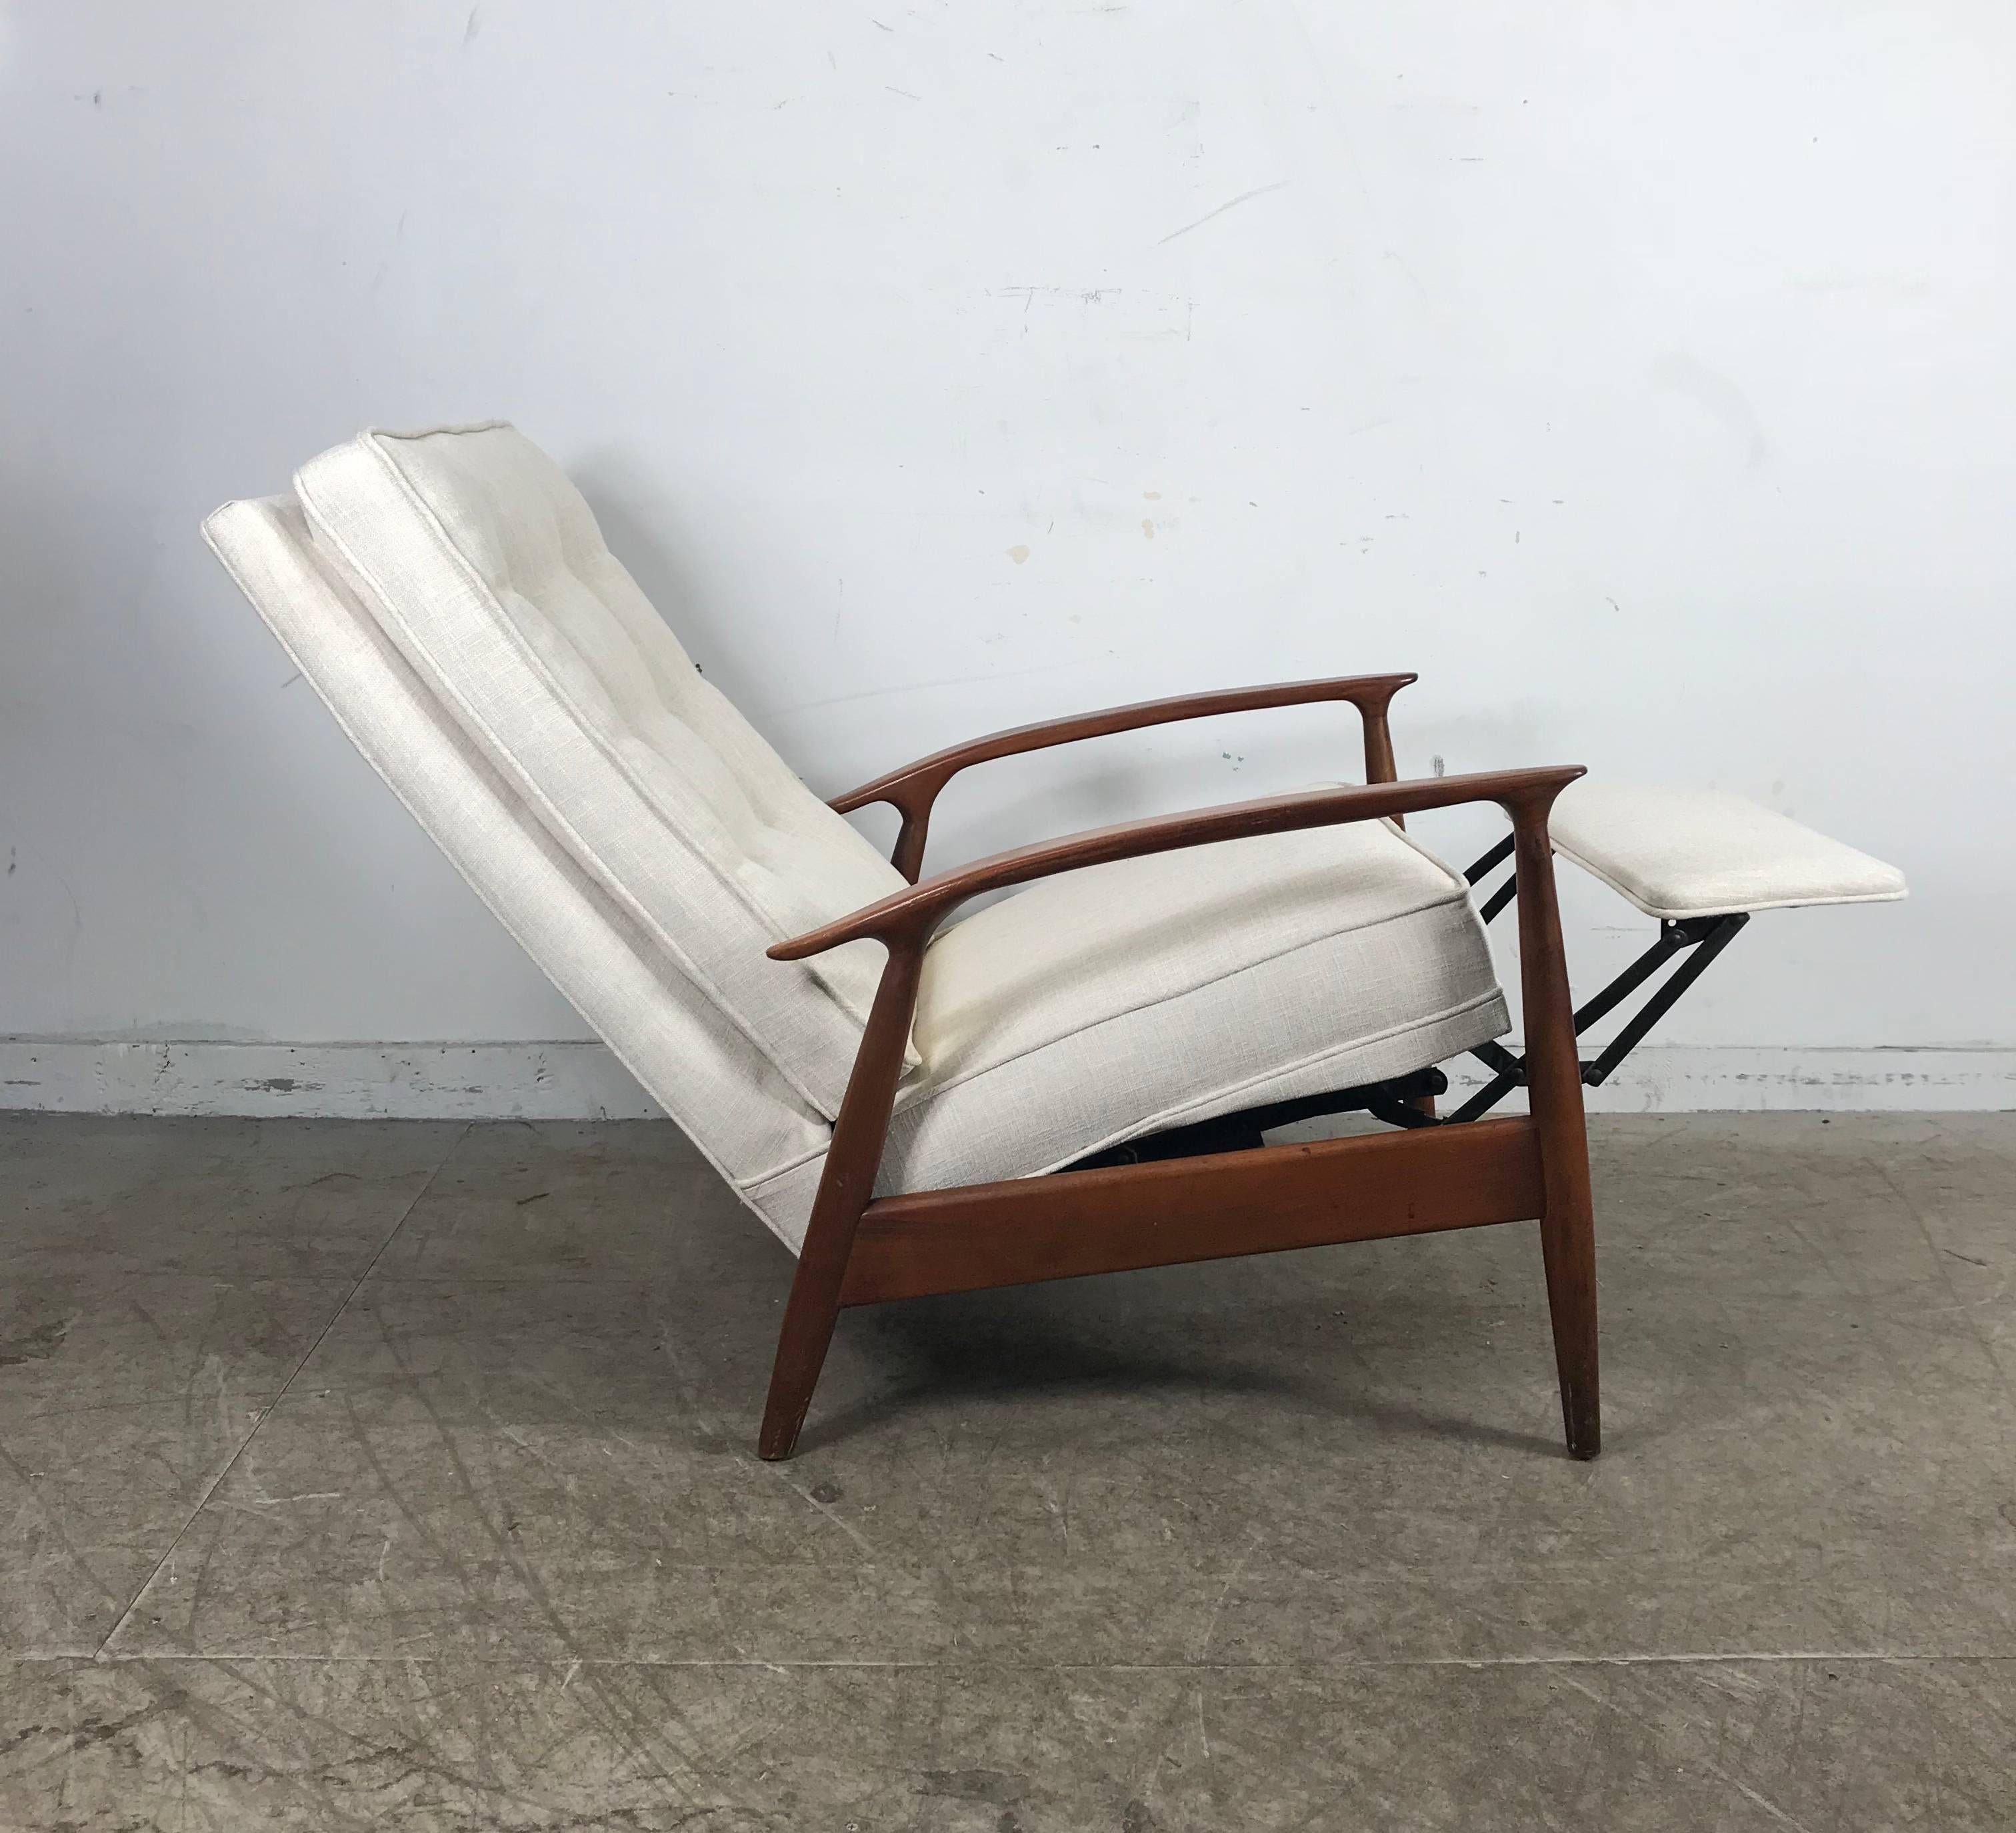 American Classic Modernist Reclining Lounge Chair by Milo Baughman